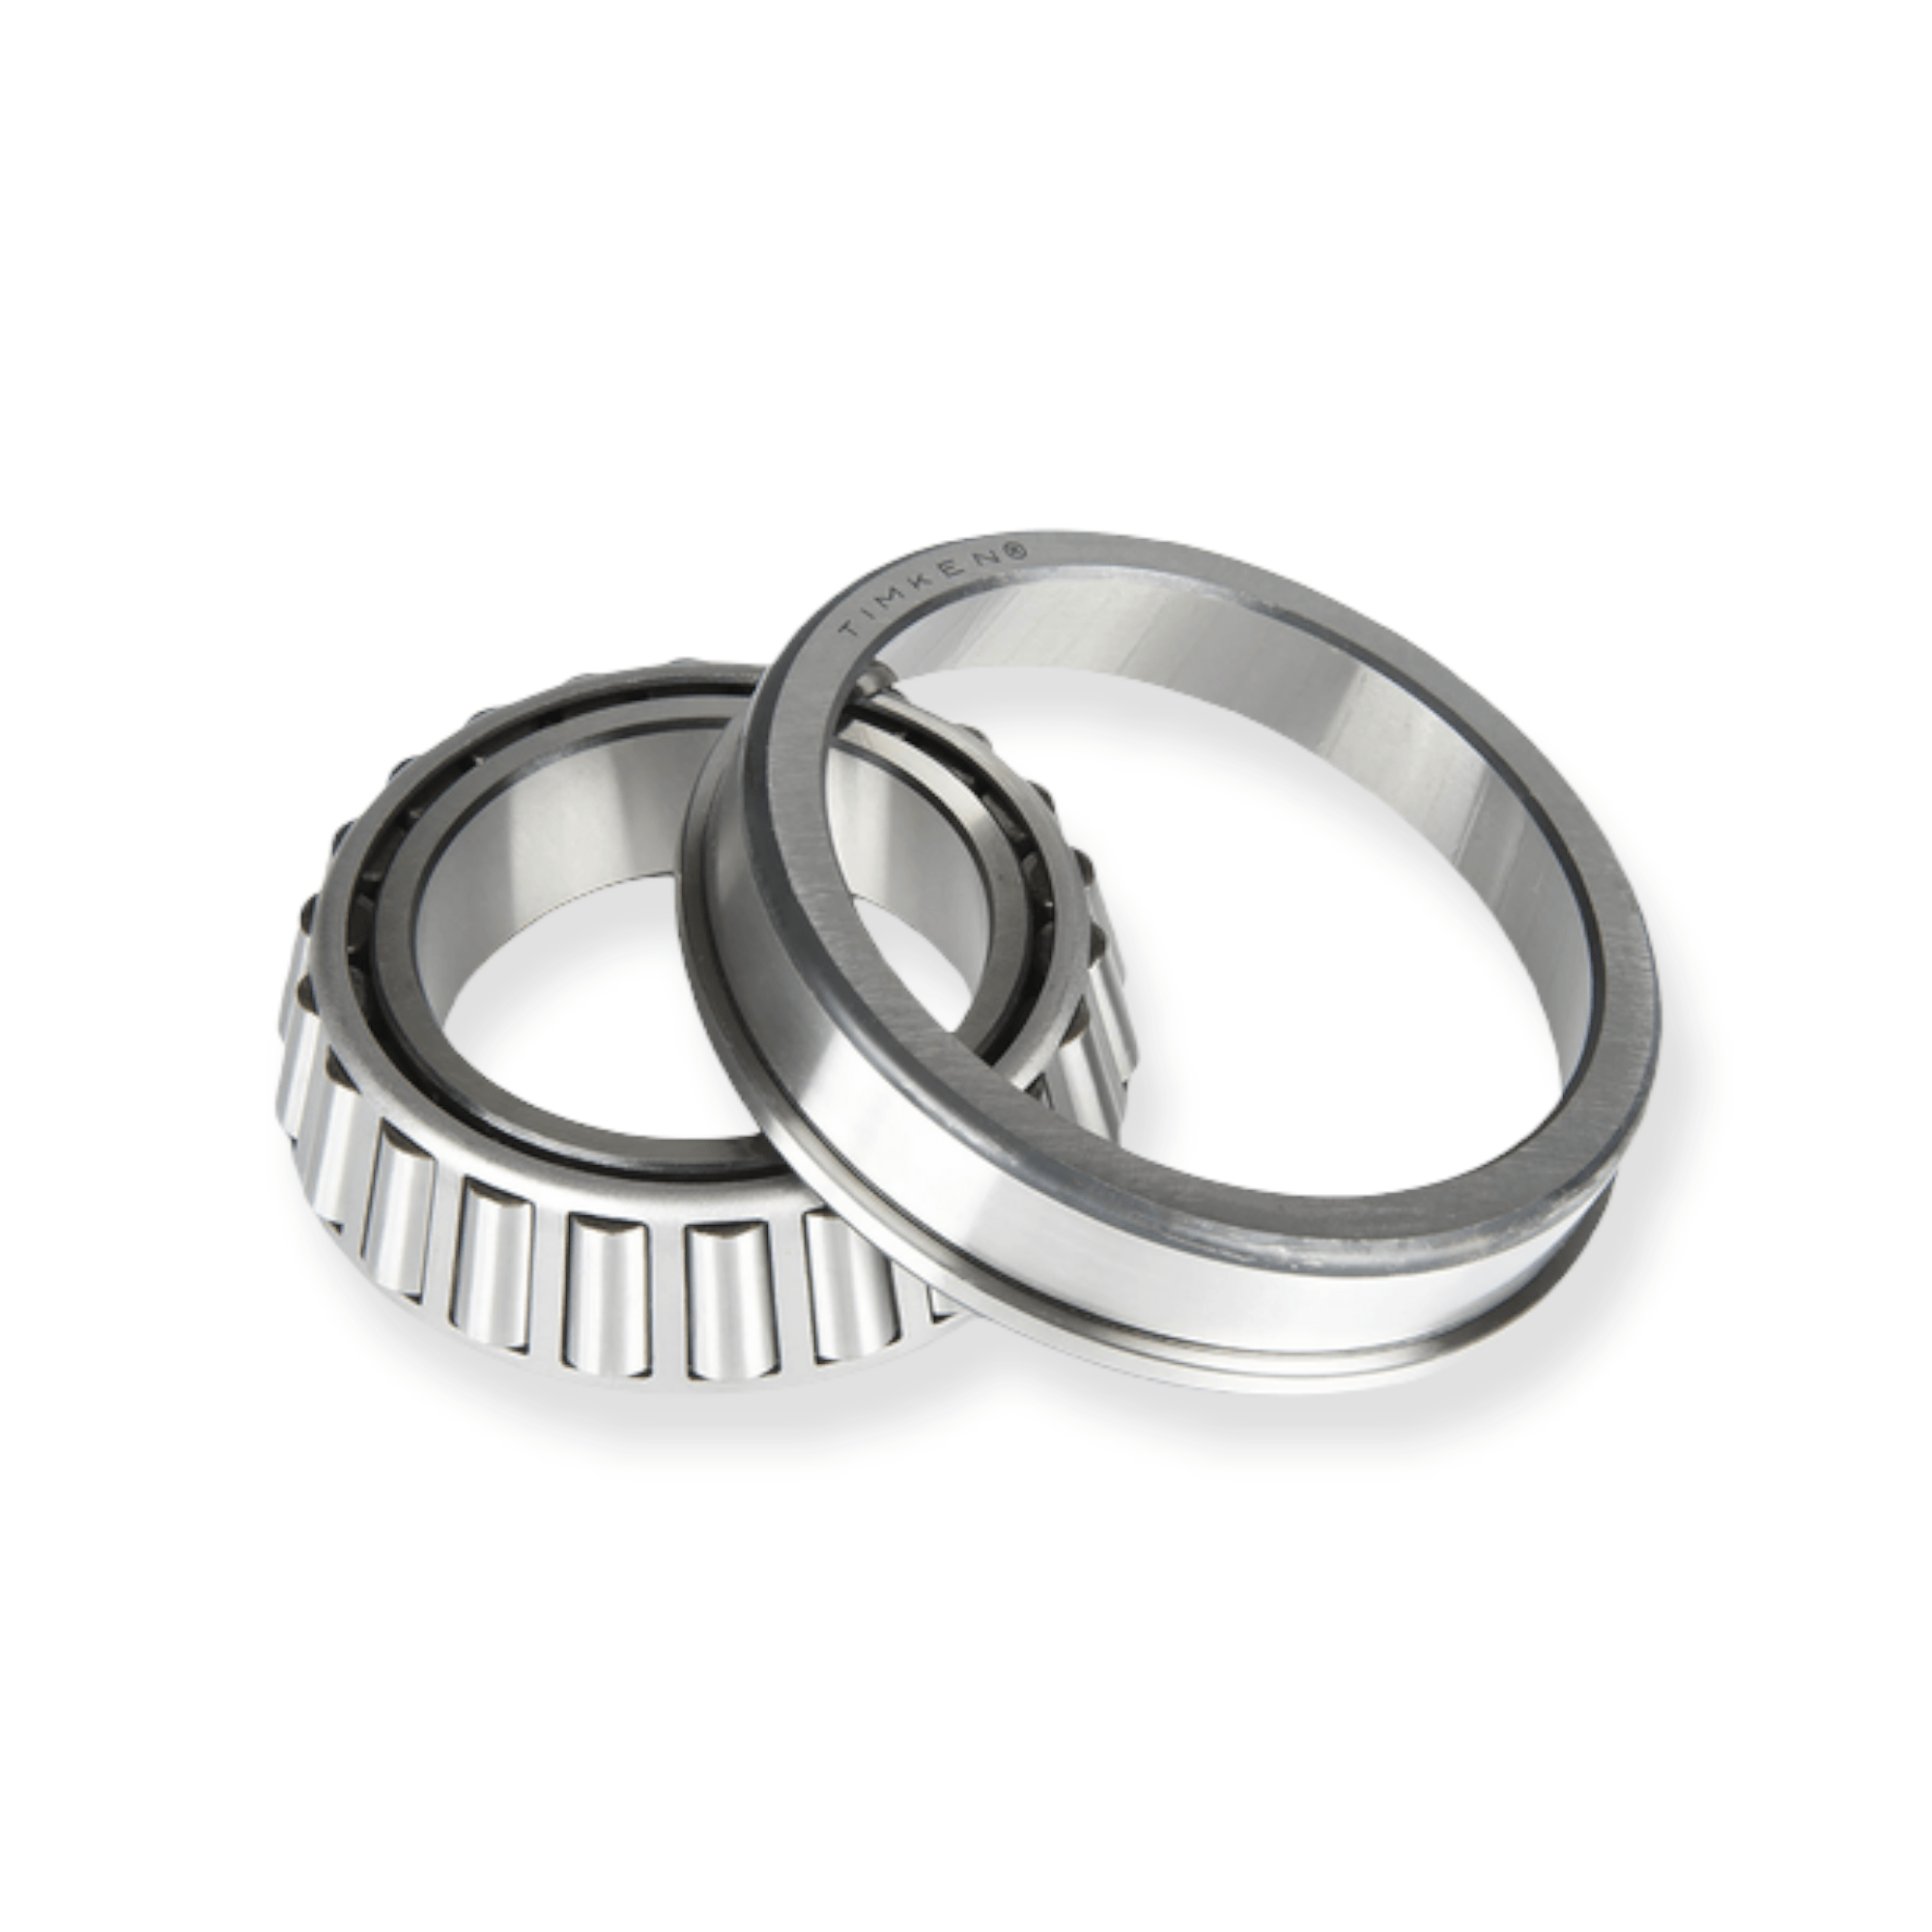 SKF 30224 J2 Tapered Roller Bearing Full Assembly - 120 mm Bore, 215 mm OD, 40 mm Cone Width, 34 mm Cup Width - Apollo Industries llc